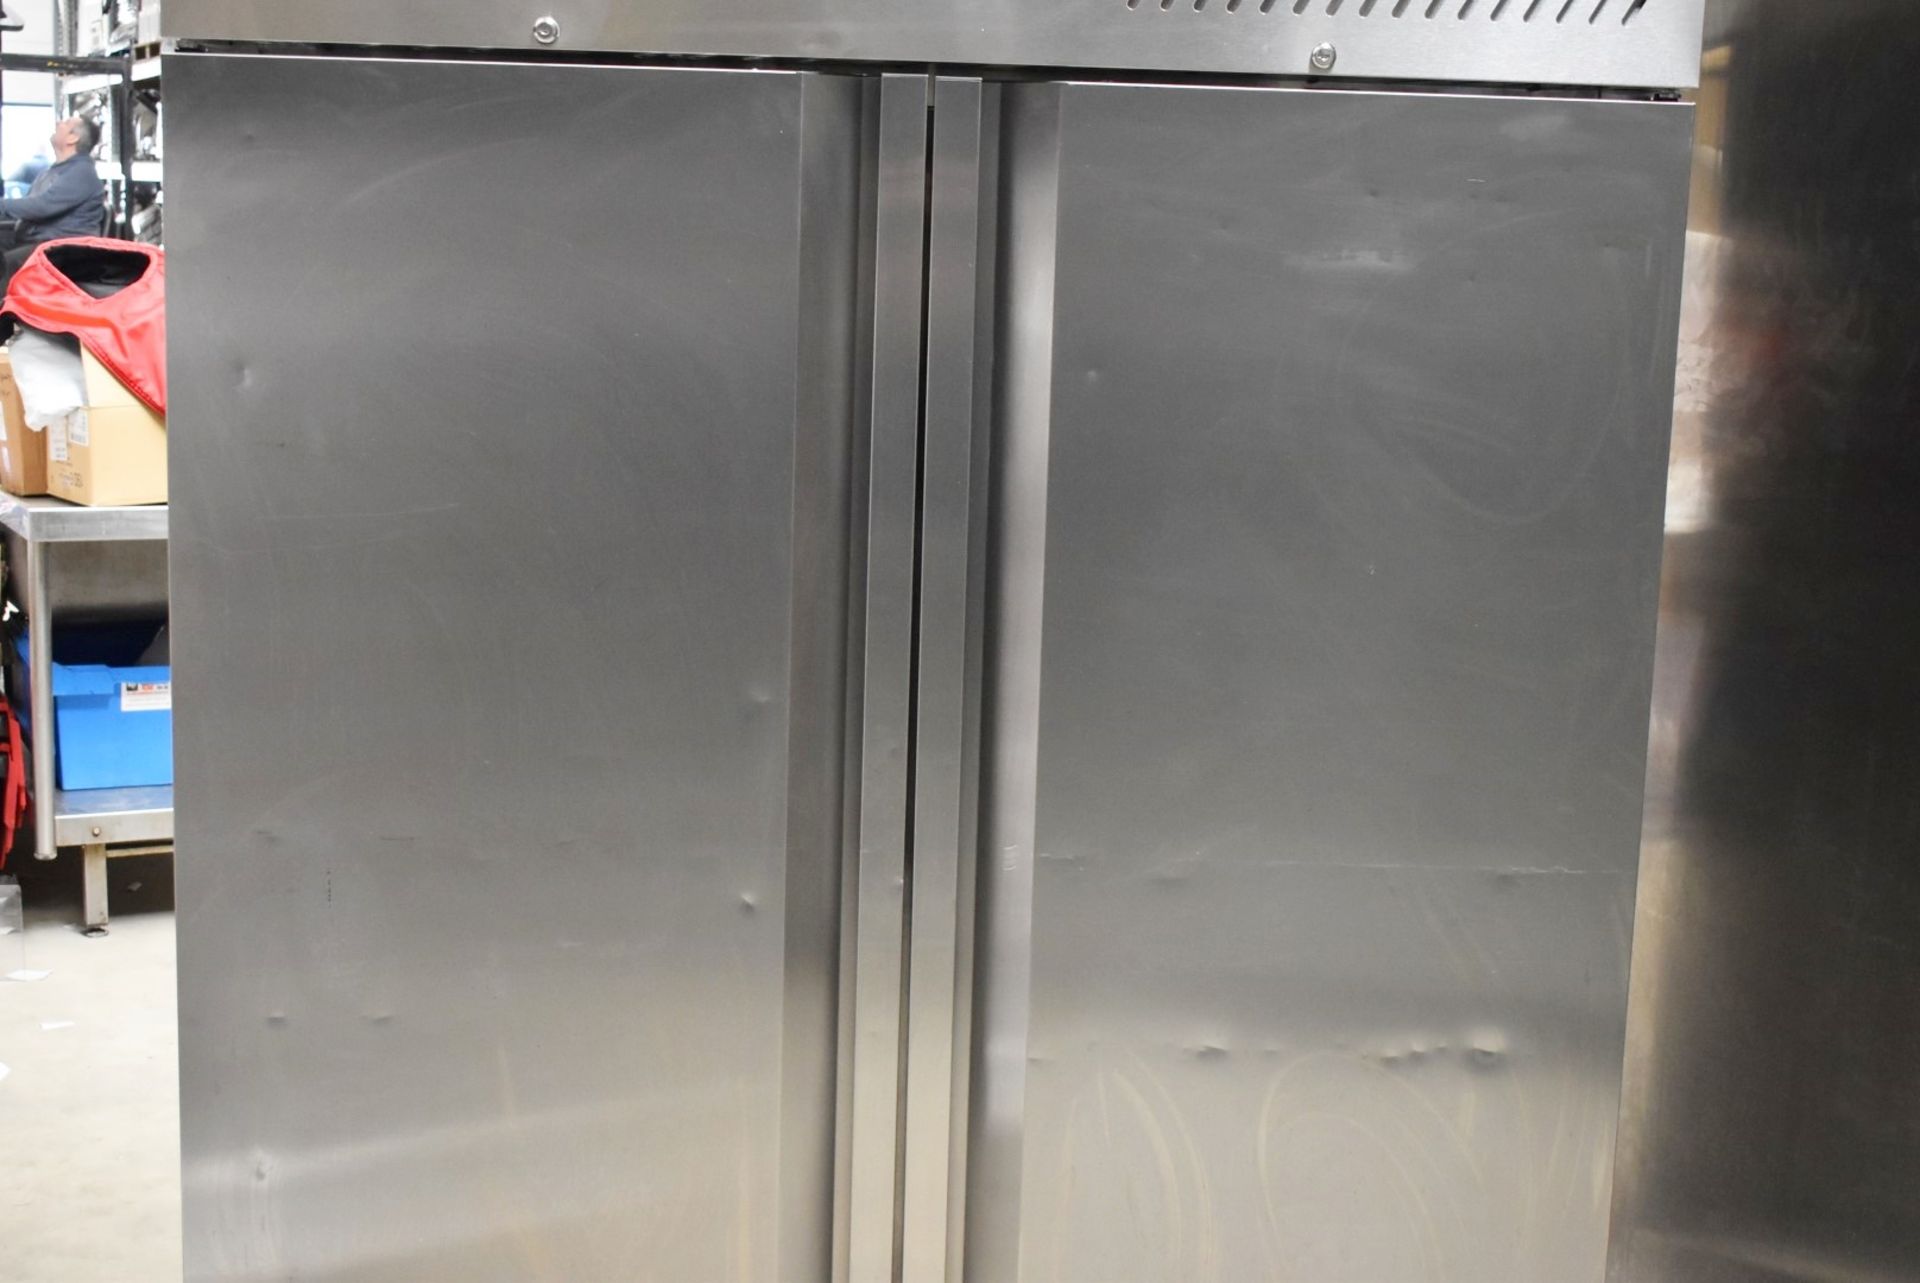 1 x Williams Double Door Upright Refrigerator - Model MJ2SA - Complete With Internal Shelves - - Image 2 of 15